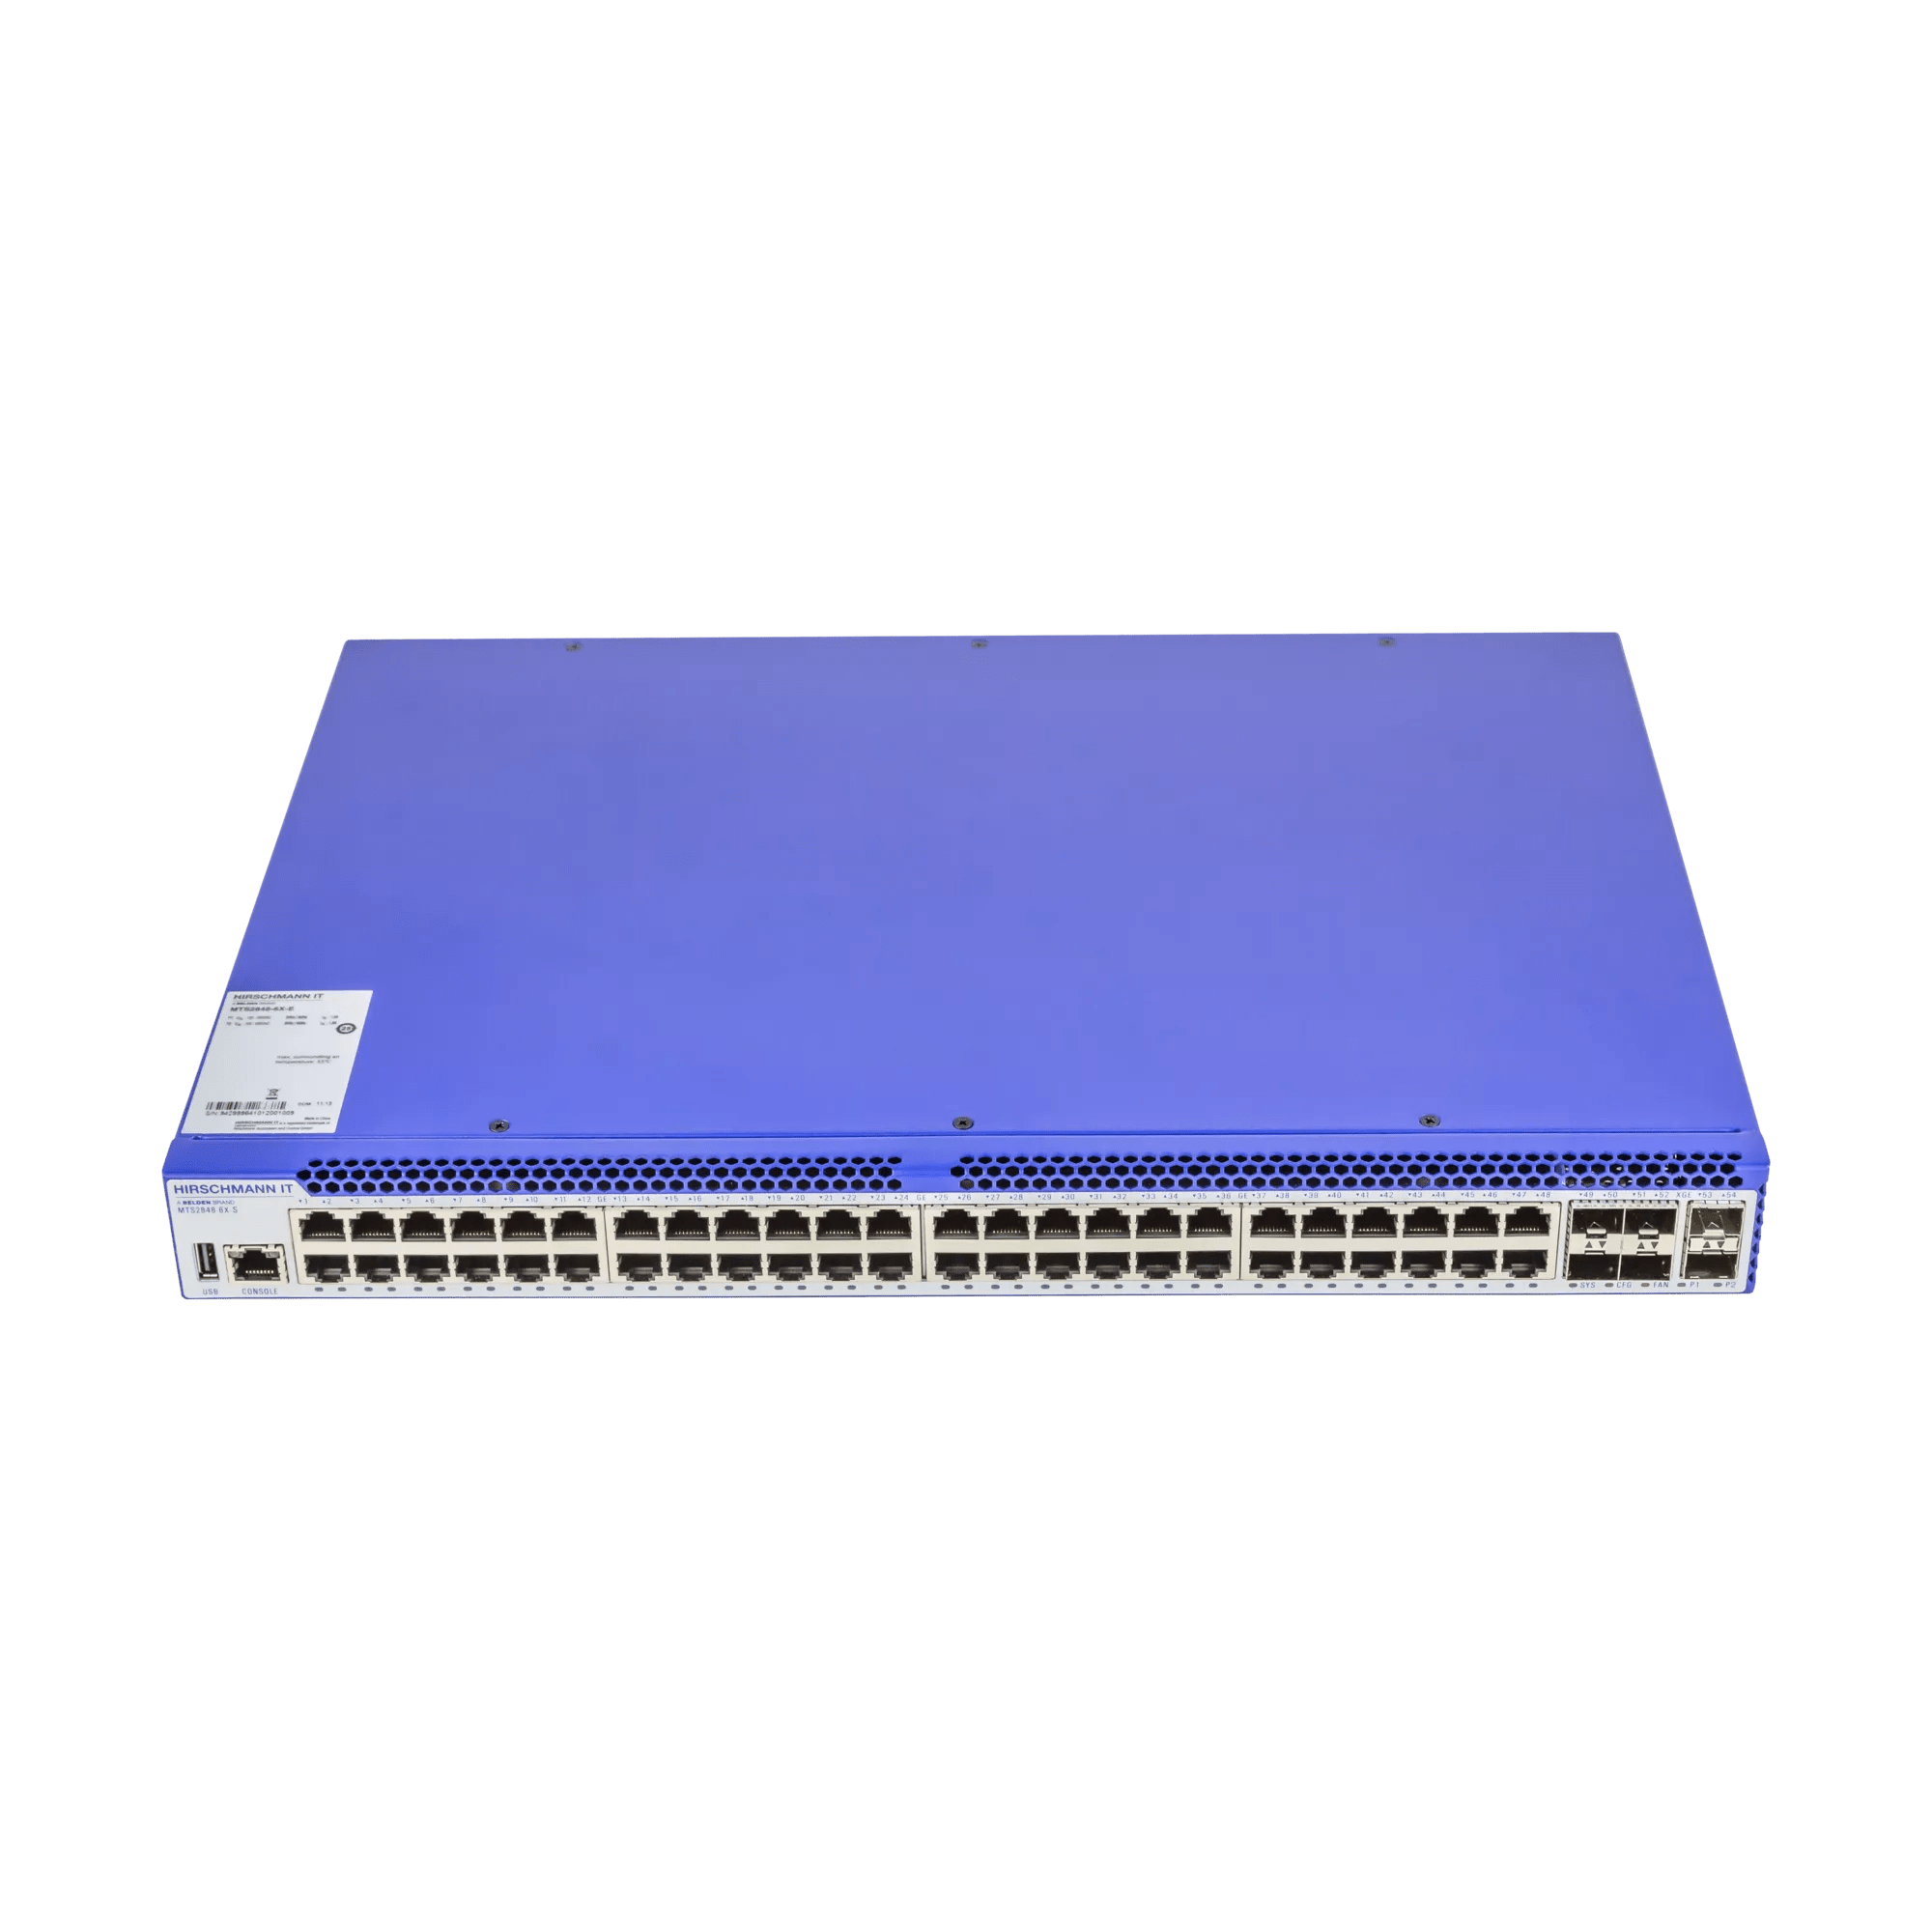 MAMMATHUS 2800 Series Managed Ethernet Switch, top view